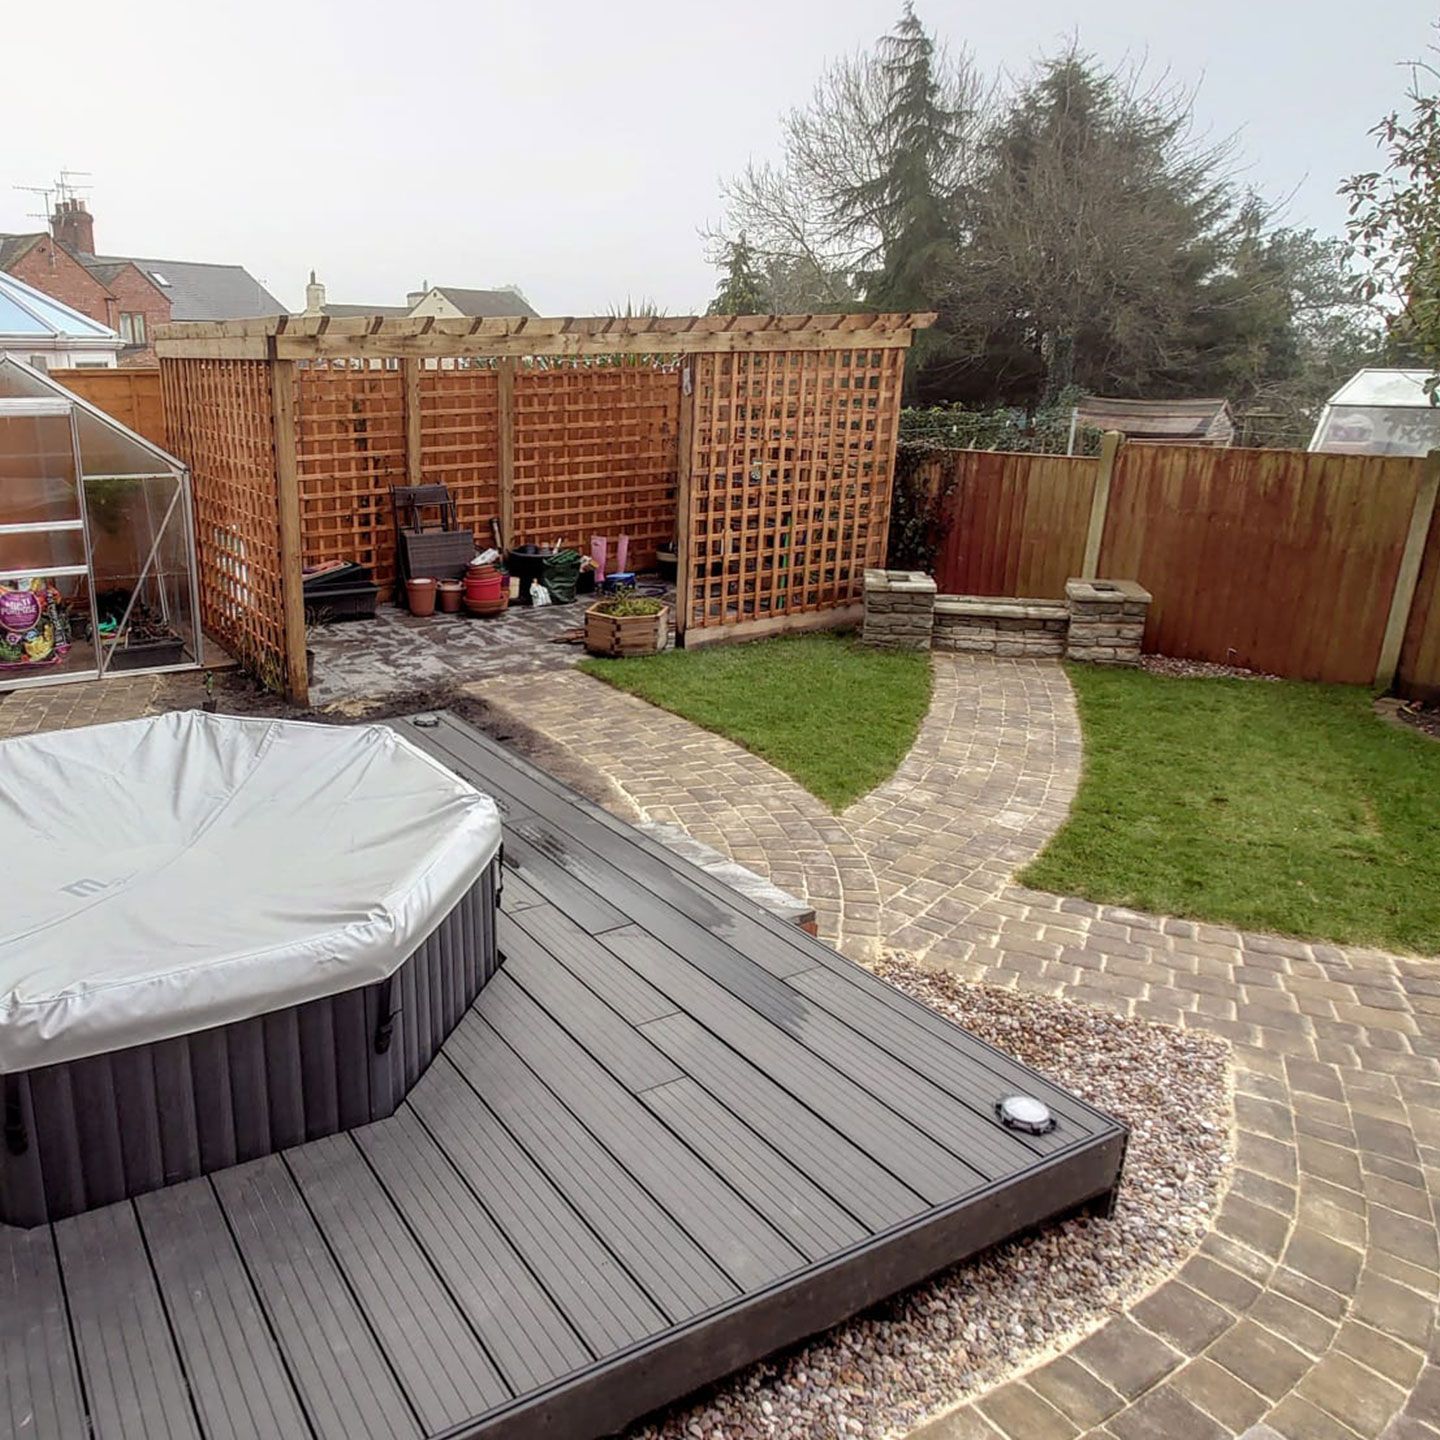 DNA Landscaping Long Lawford garden with composite decking in a garden